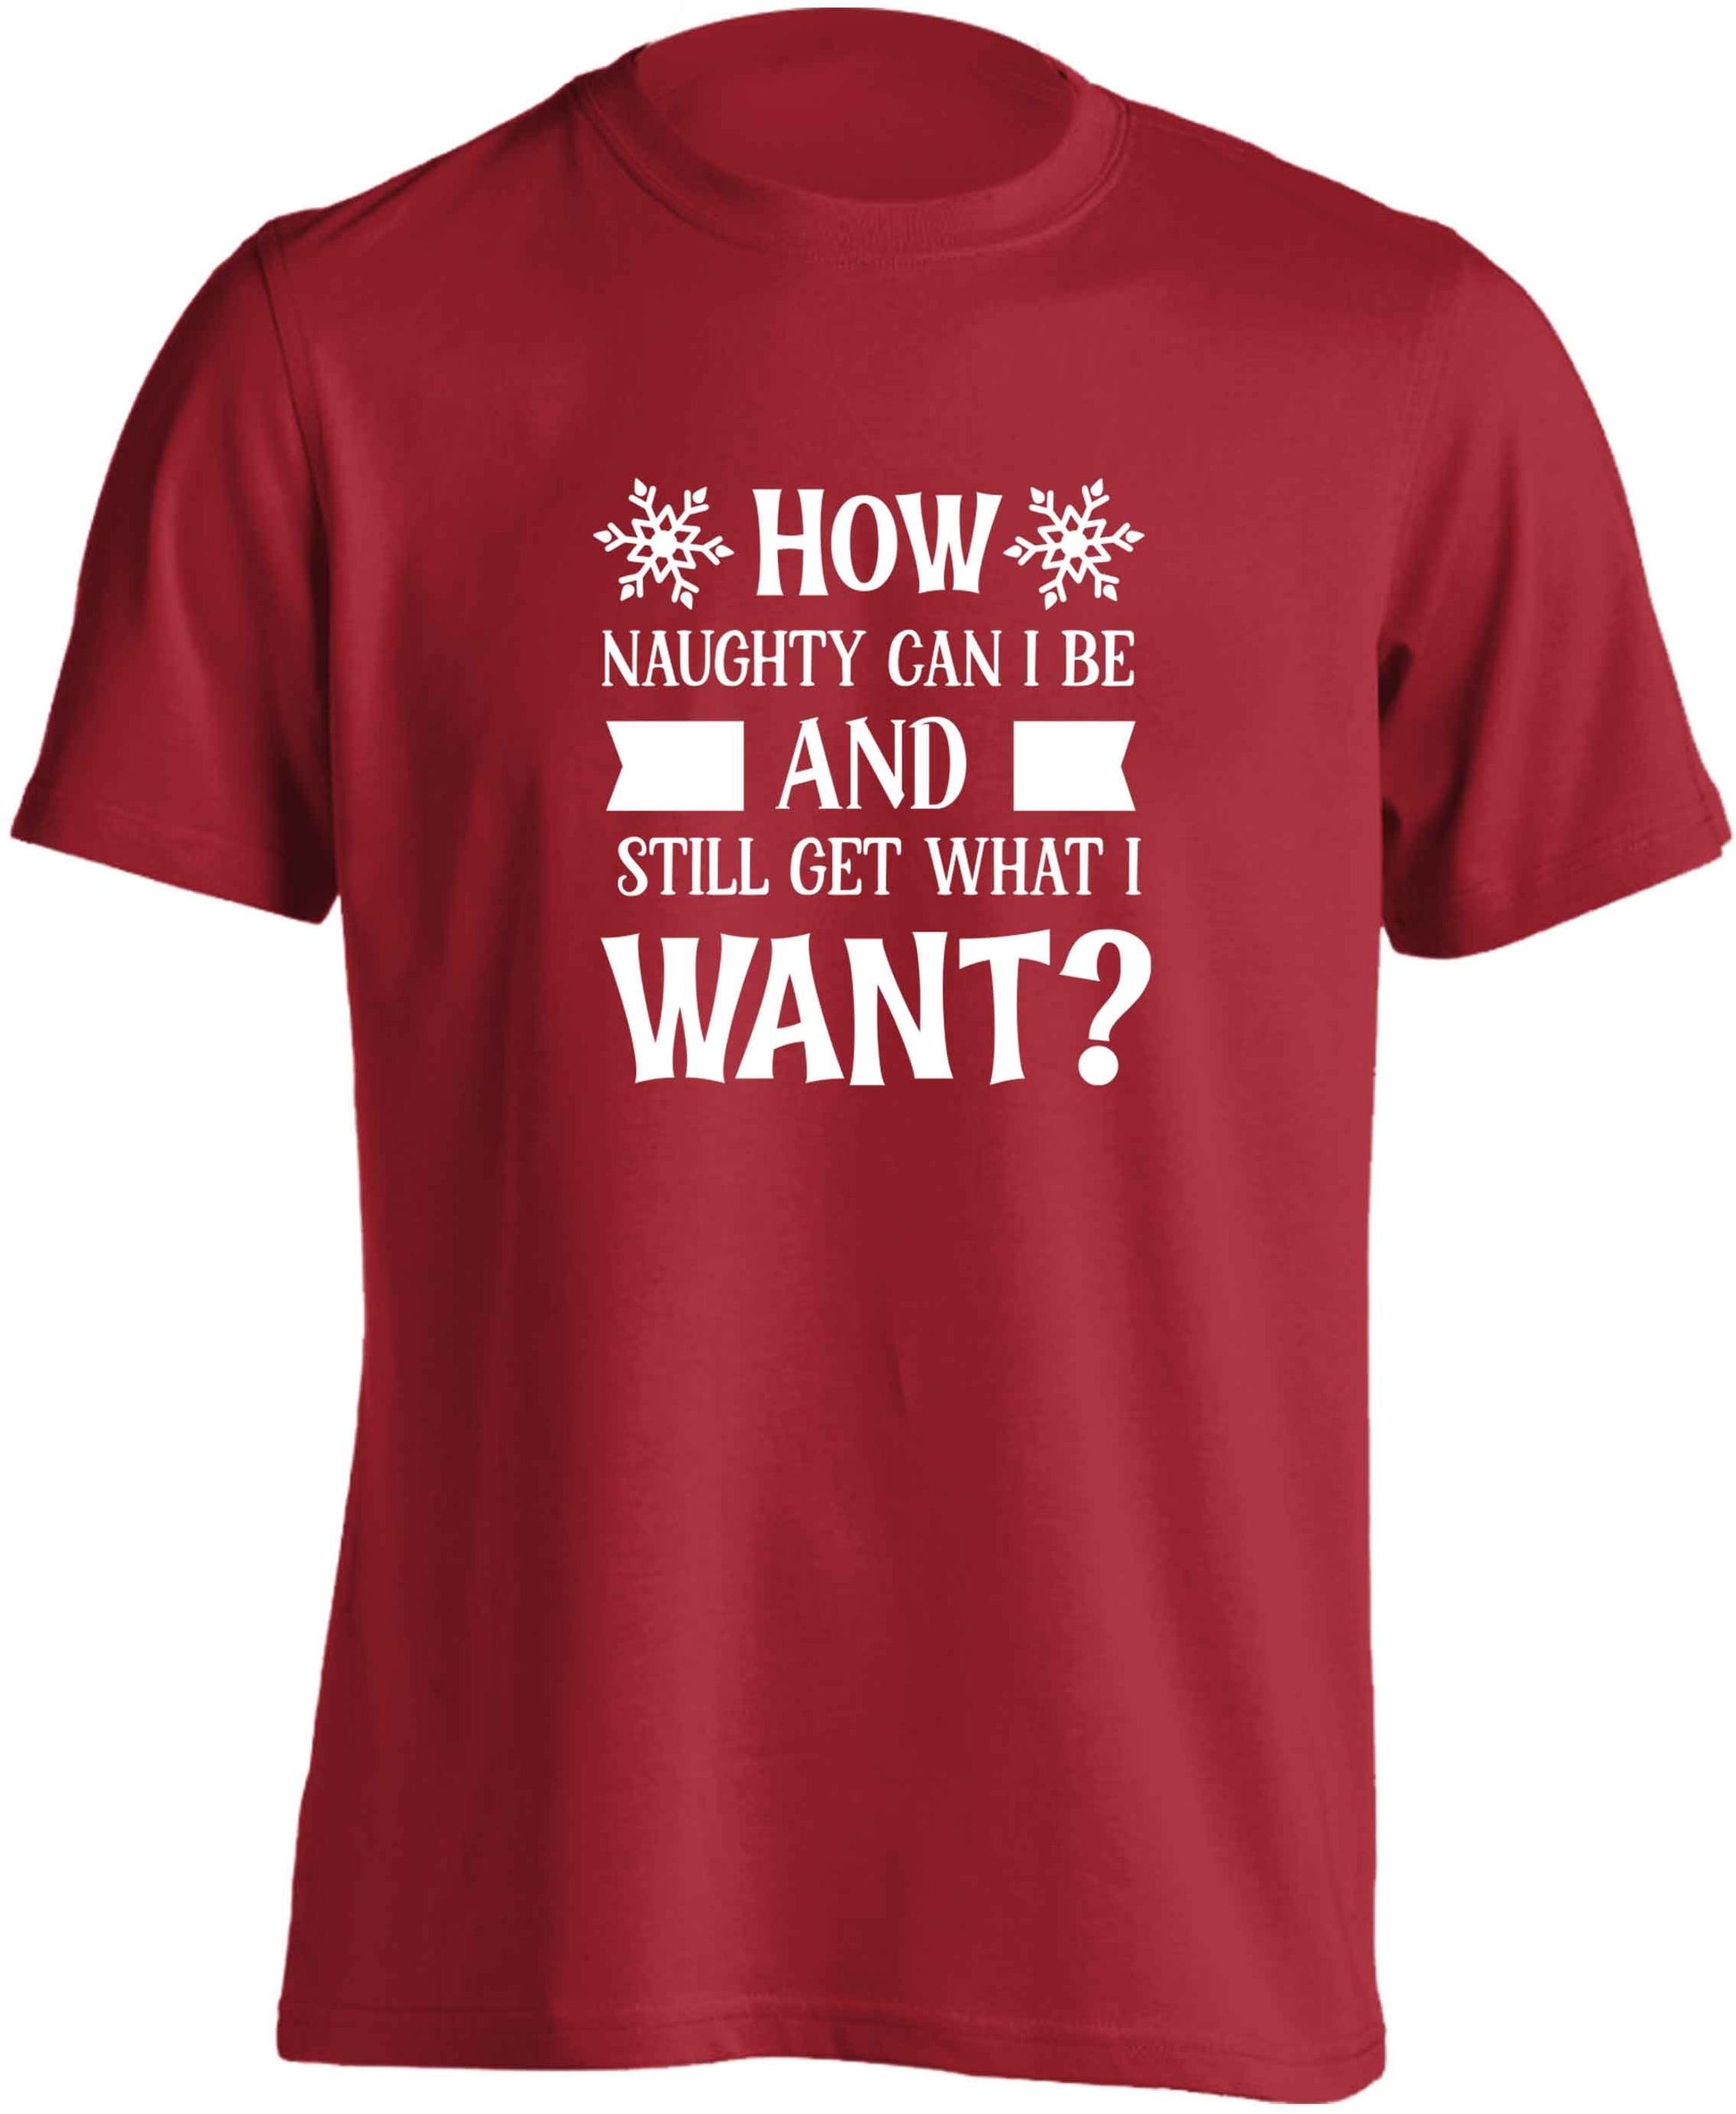 How naughty can I be and still get what I want? adults unisex red Tshirt 2XL